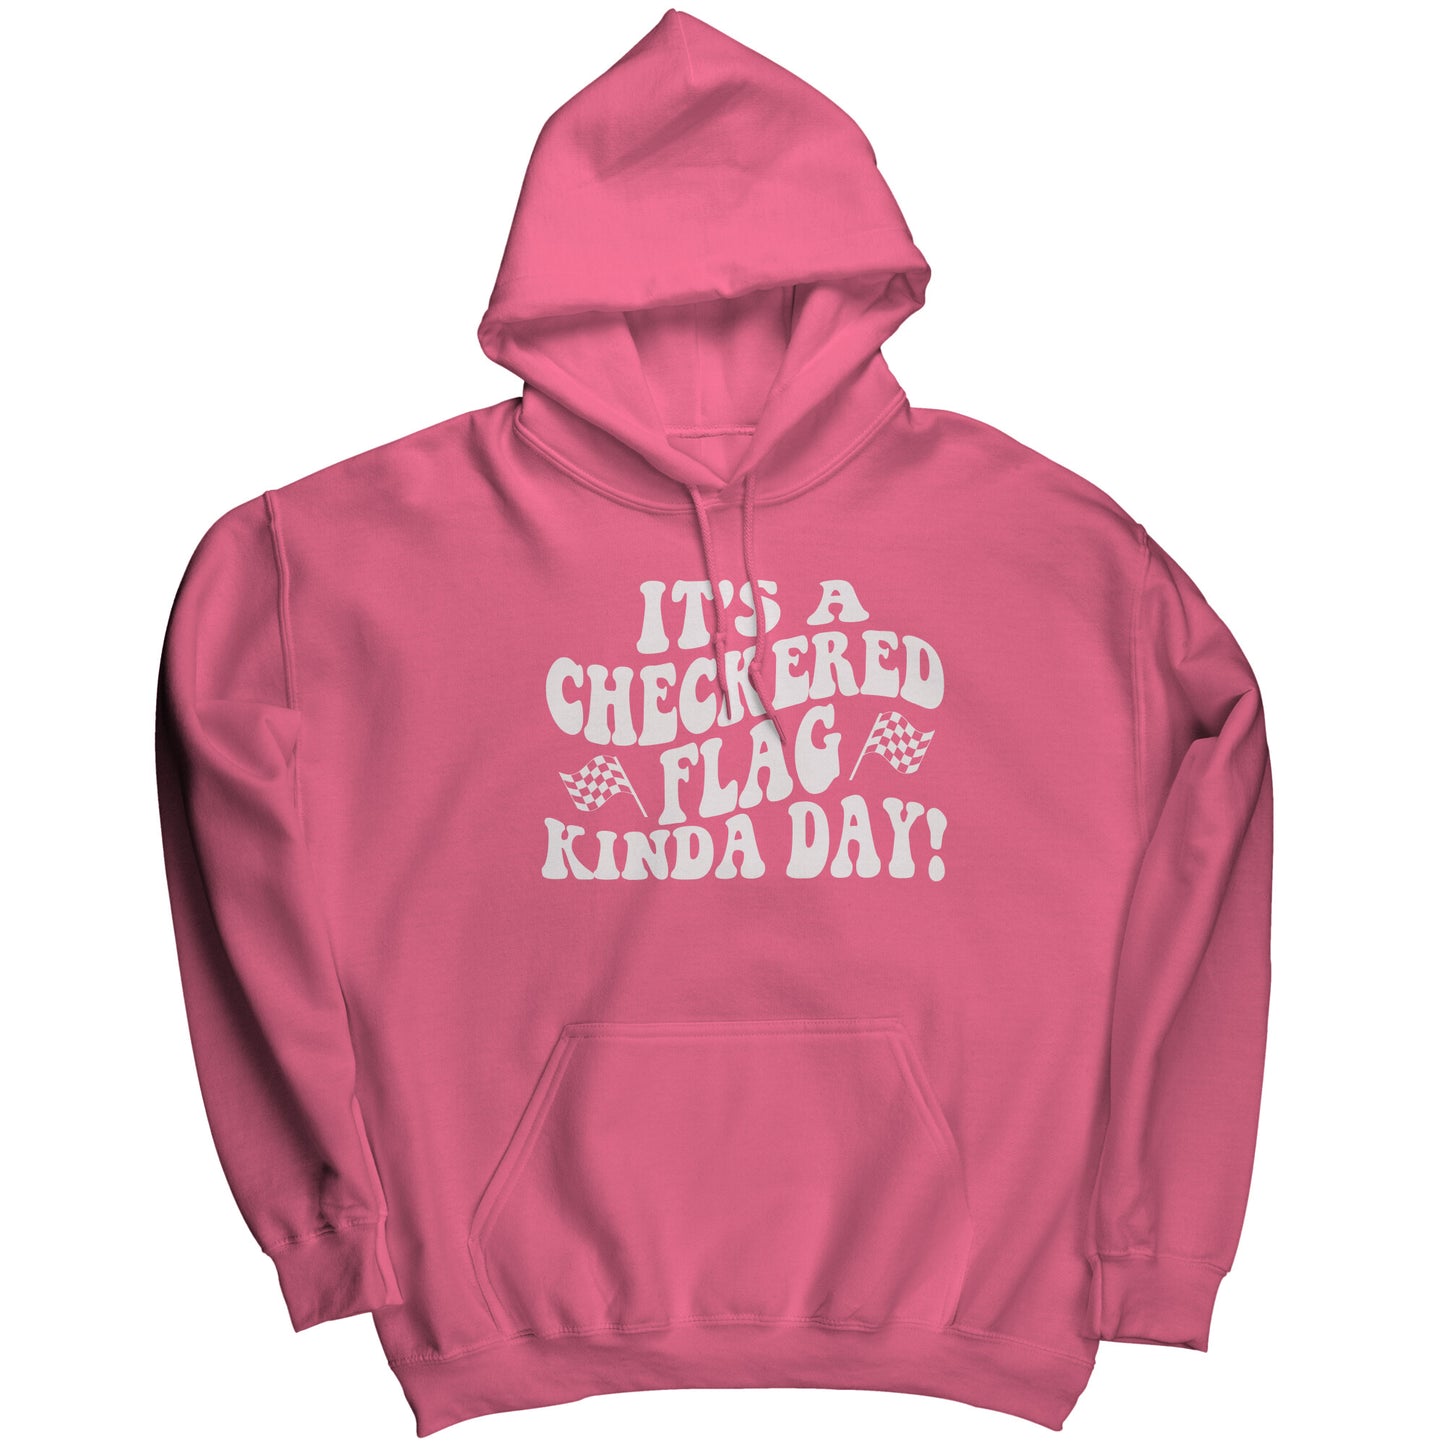 It's A Checkered Flag Kind Of Day Hoodie Sweatshirt